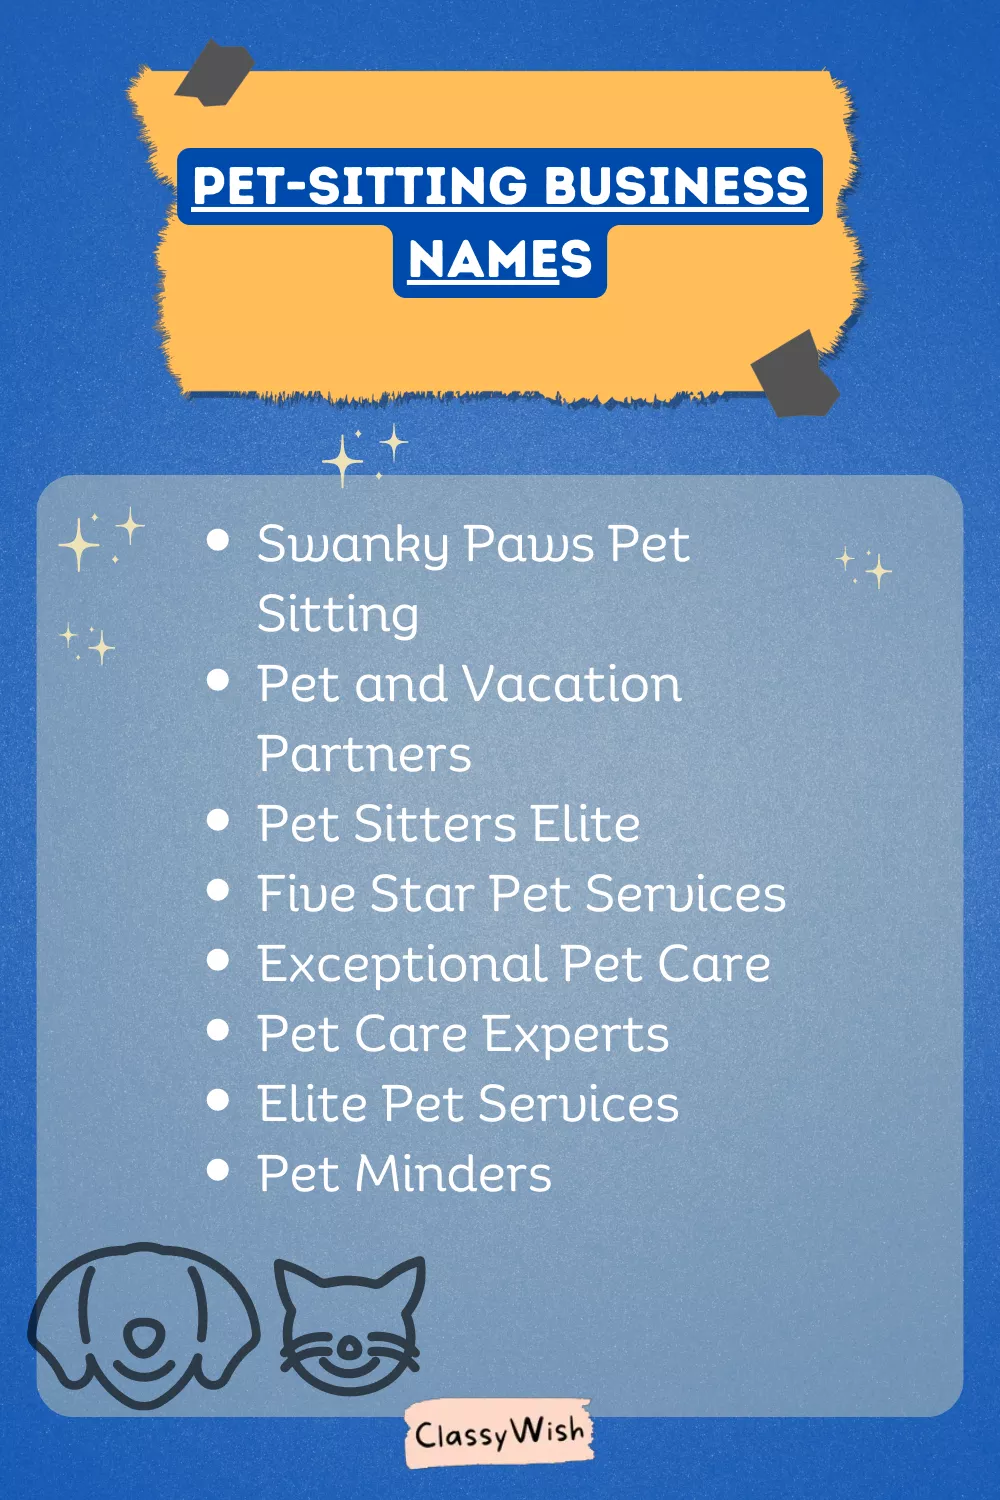 Pet-Sitting business names